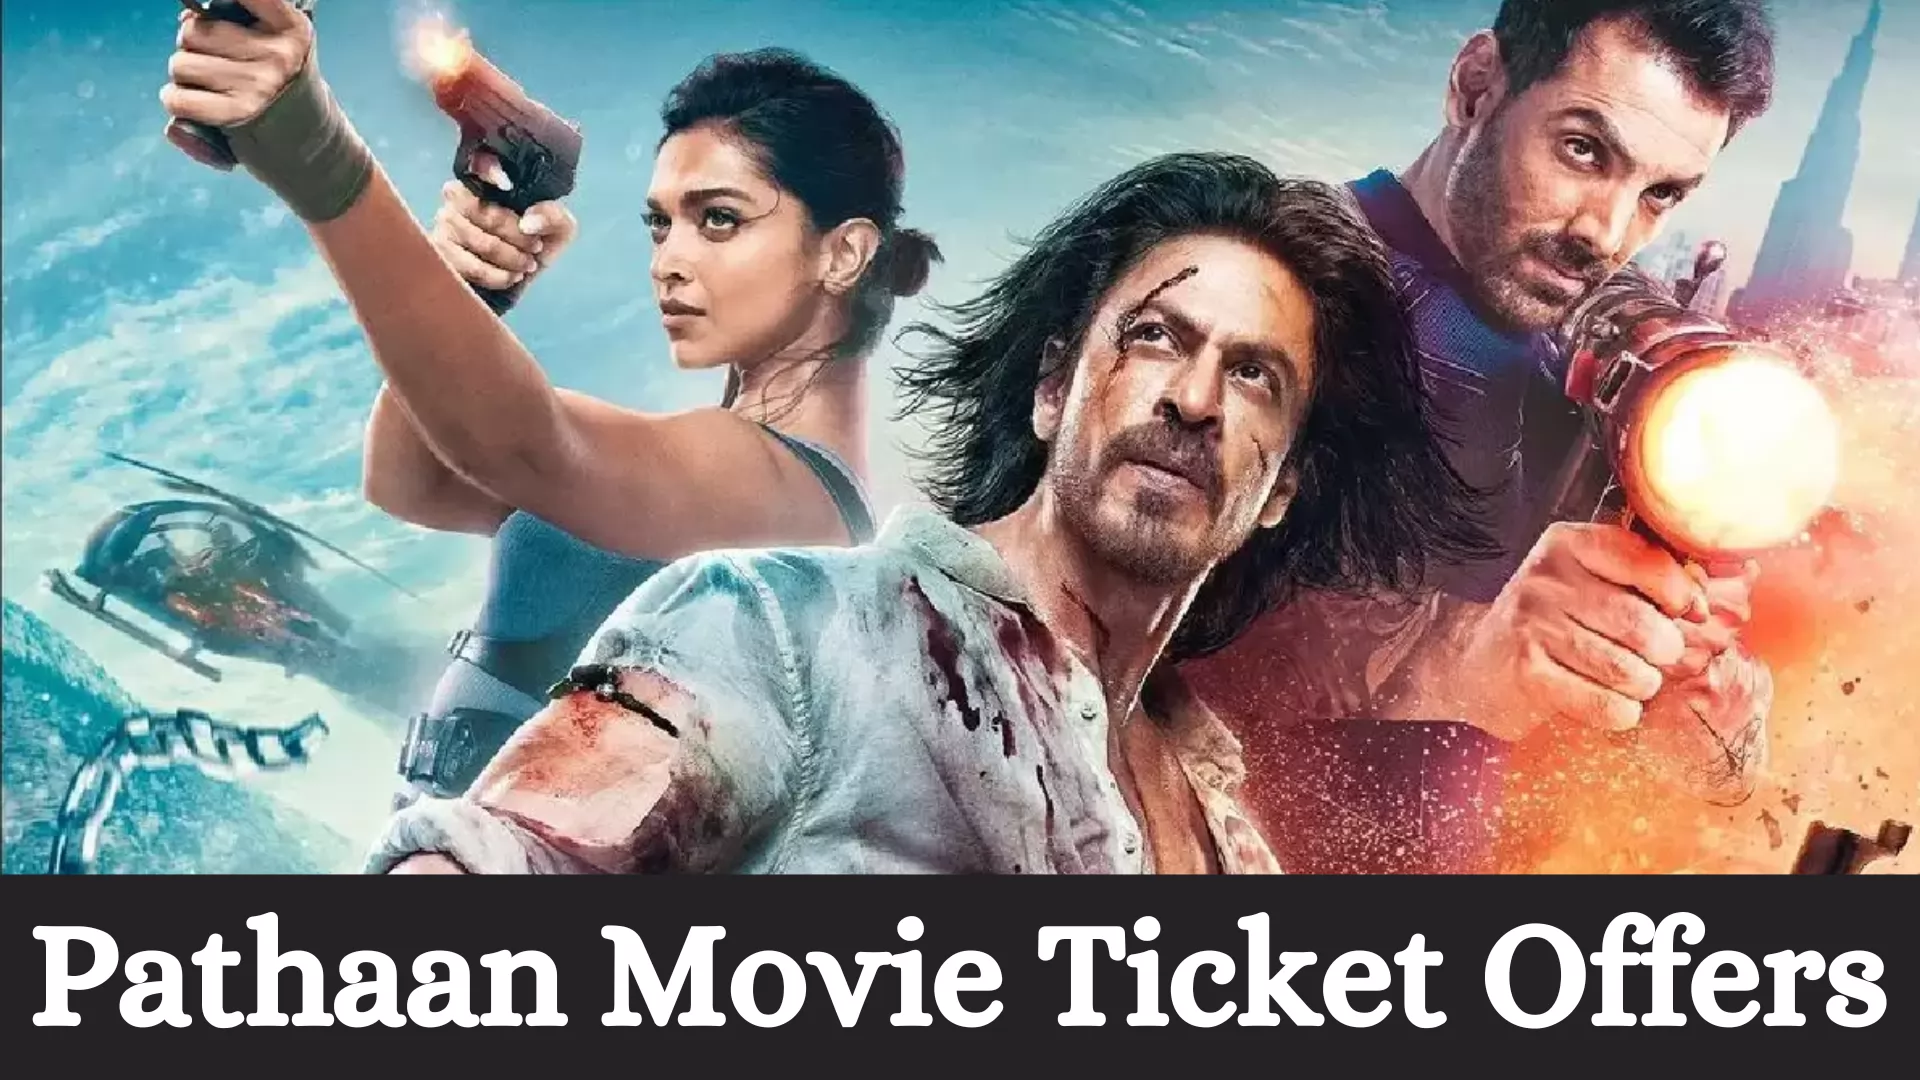 Pathaan Movie Ticket Offers